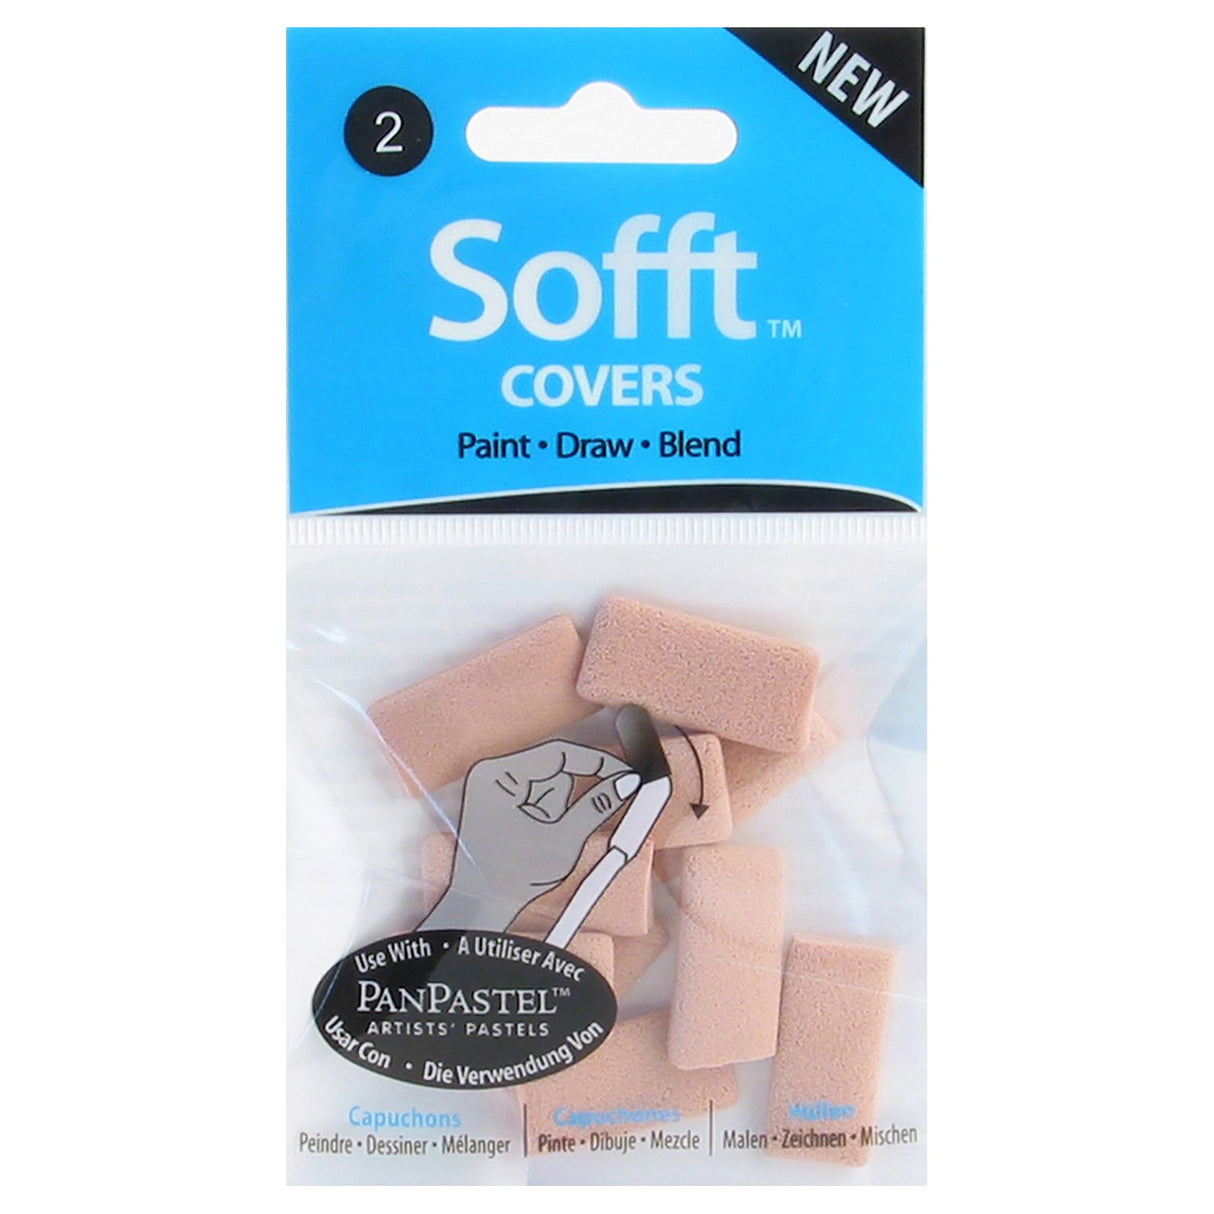 PanPastel Sofft #2 Flat Covers 10 Pack